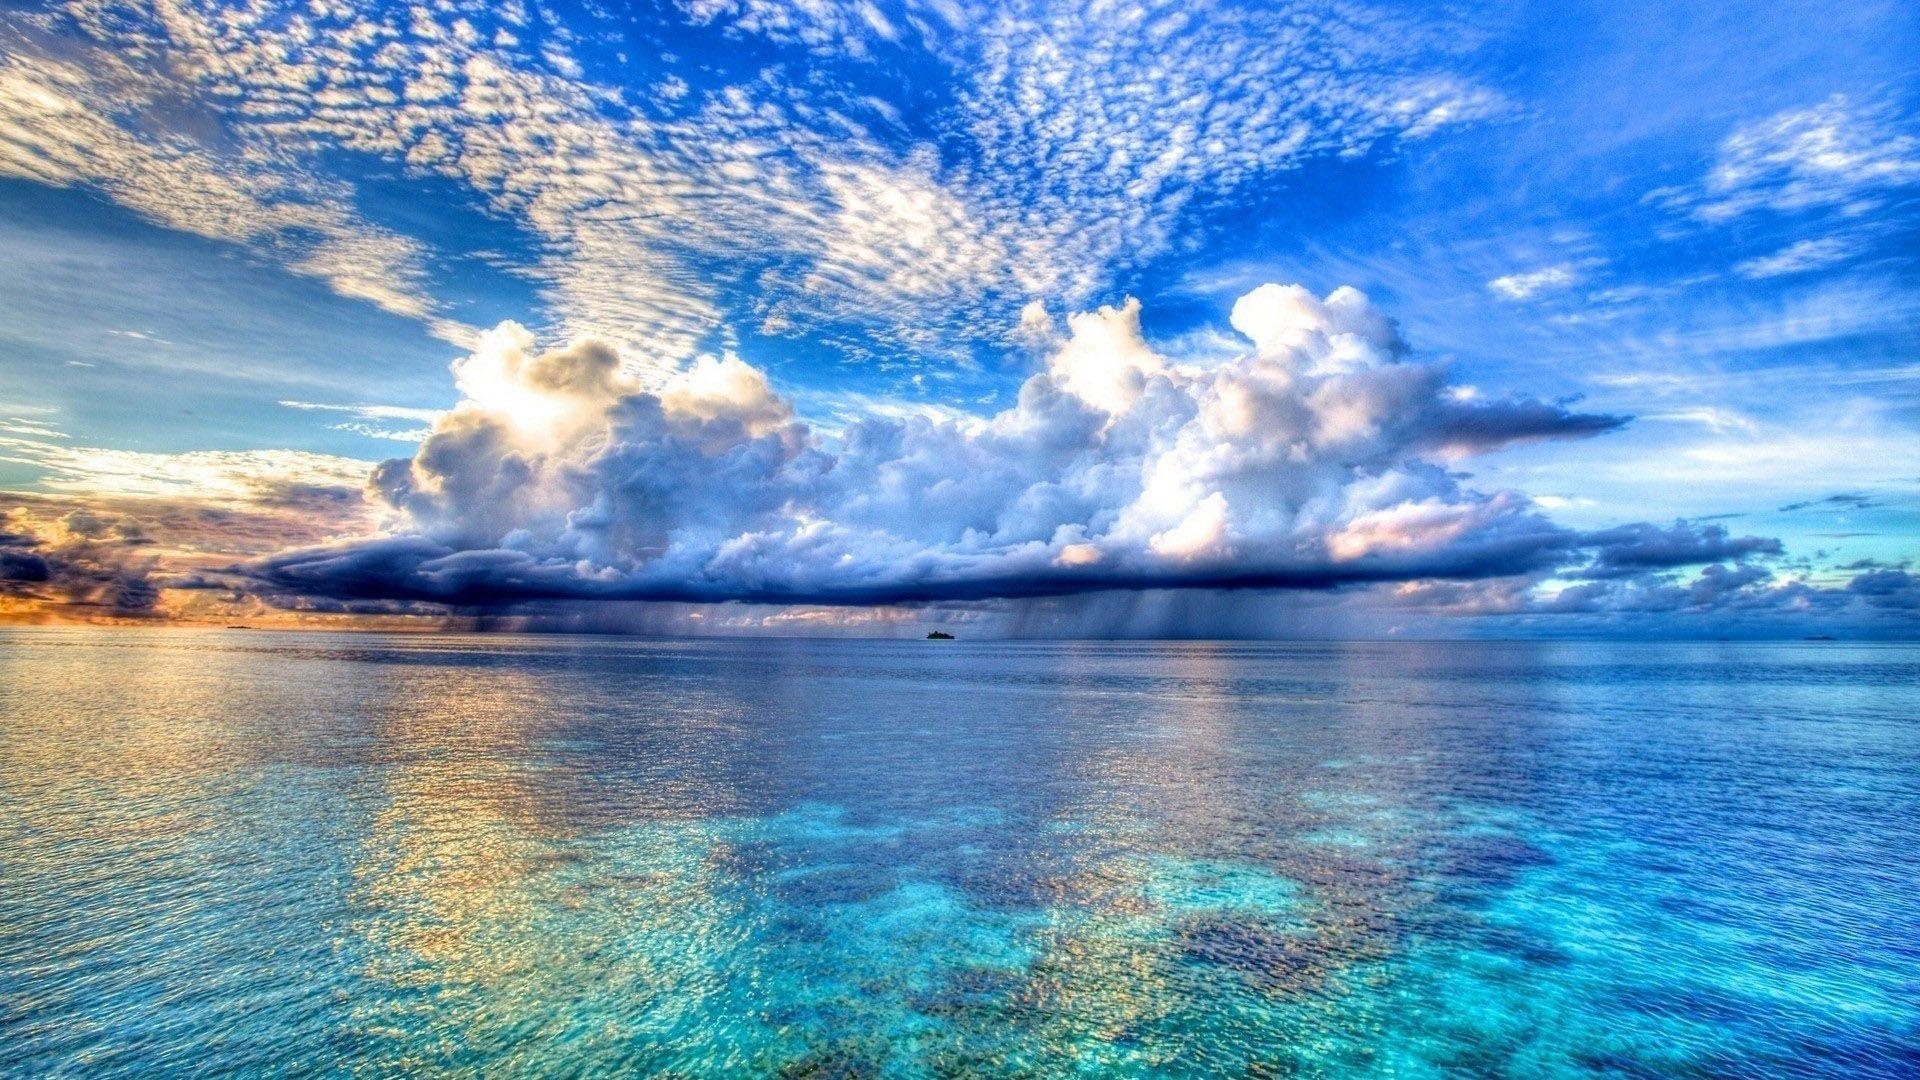 Clouds and Beach Wallpaper